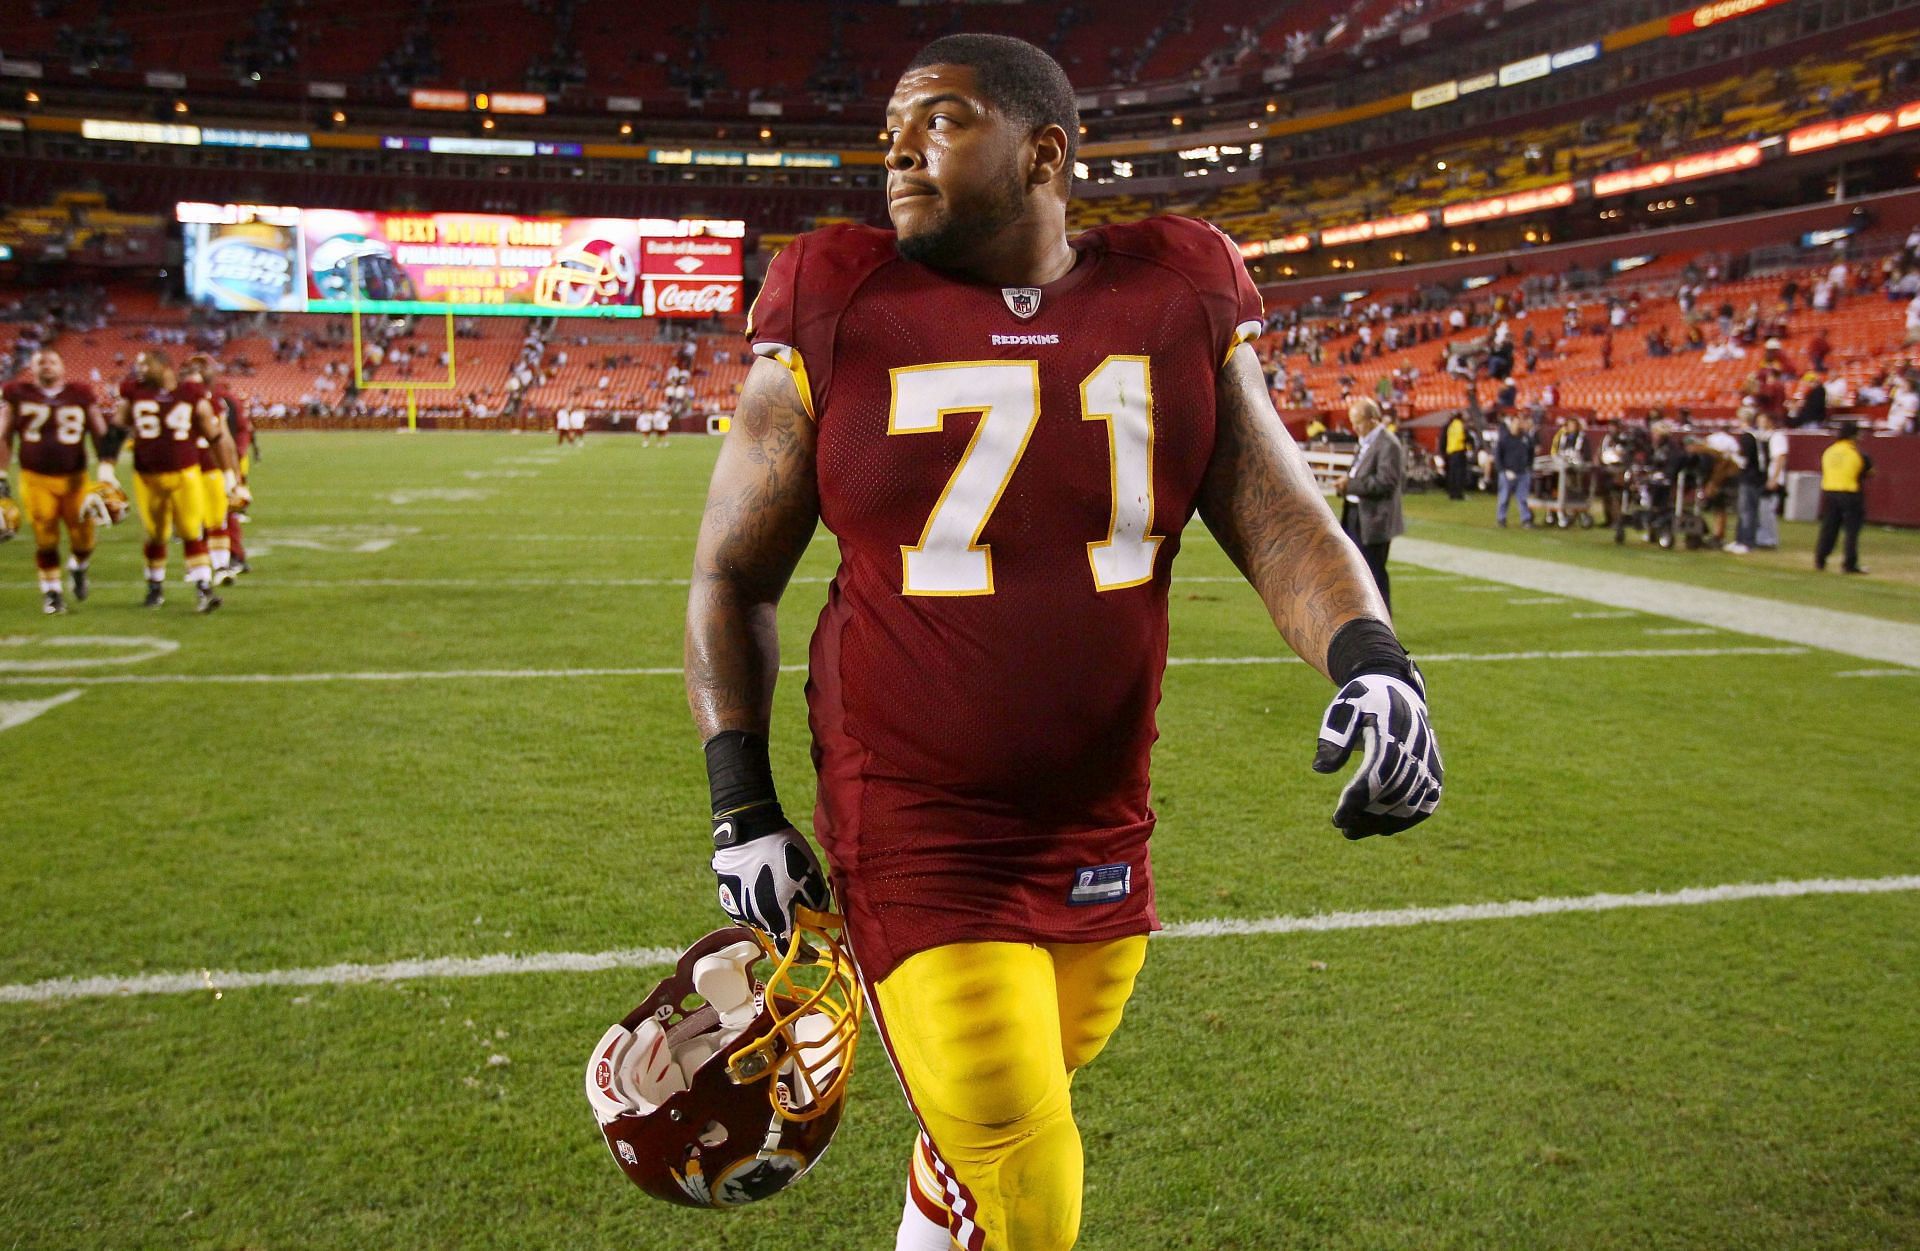 Trent Williams has had to battle cancer during his career